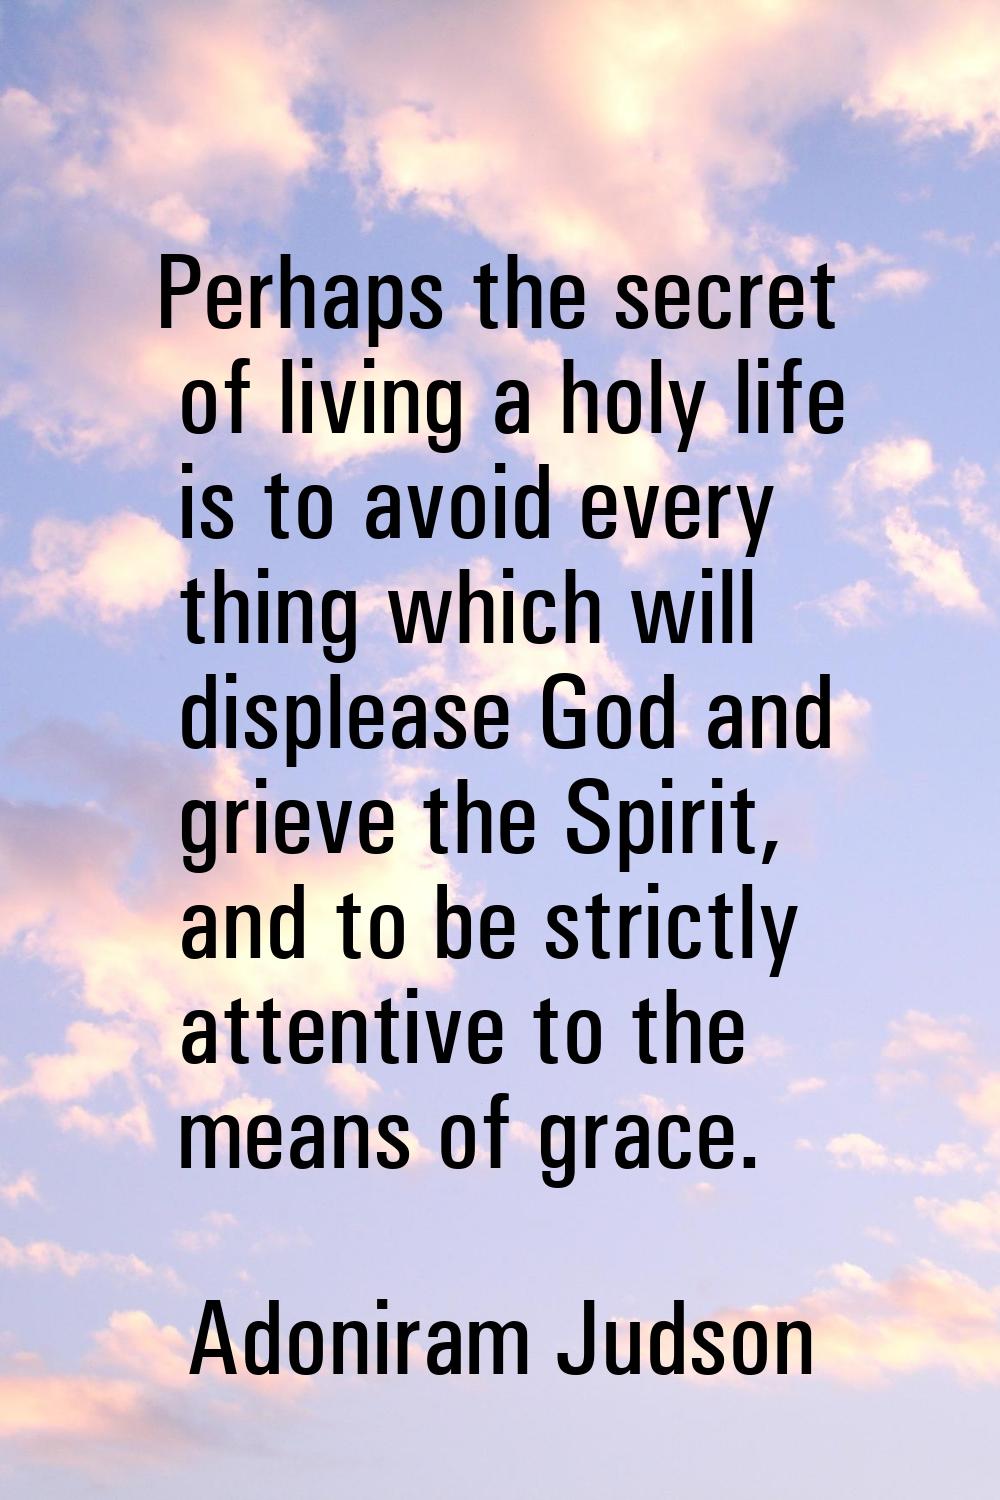 Perhaps the secret of living a holy life is to avoid every thing which will displease God and griev